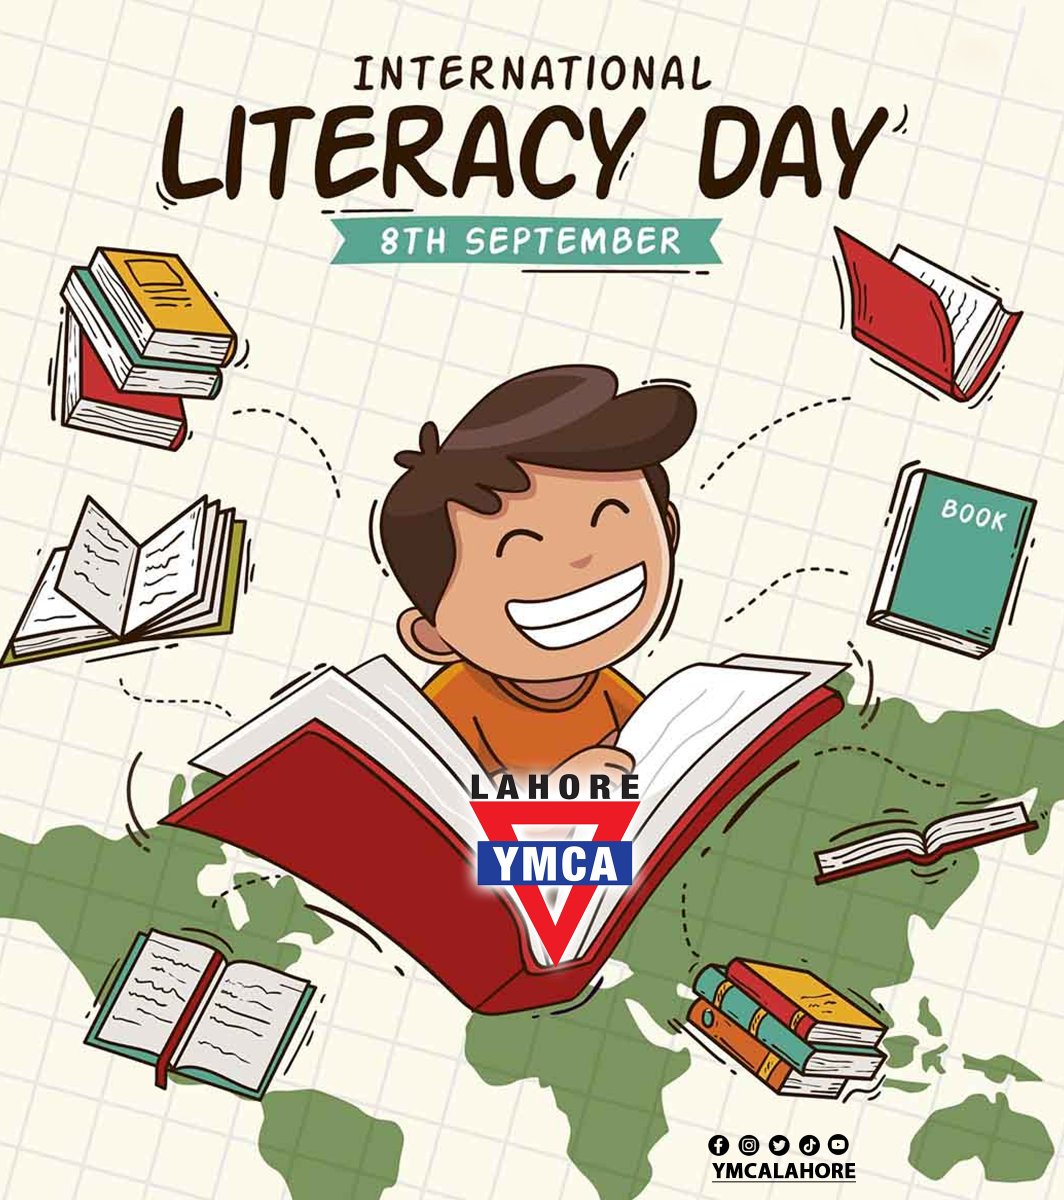 Literacy: A Key to Success and Equality
#LiteracyDay
#EducationForAll
#ReadingMatters
#LiteracyIsKey
#EmpowerThroughWords
#GlobalEducation
#LifelongLearning
#LiteracyForEquality
#SDG4 
#BooksForAll
#DigitalLiteracy
#LiteracyAwareness
#LiteracySkills
#ReadingList
#LiteracyHeroes